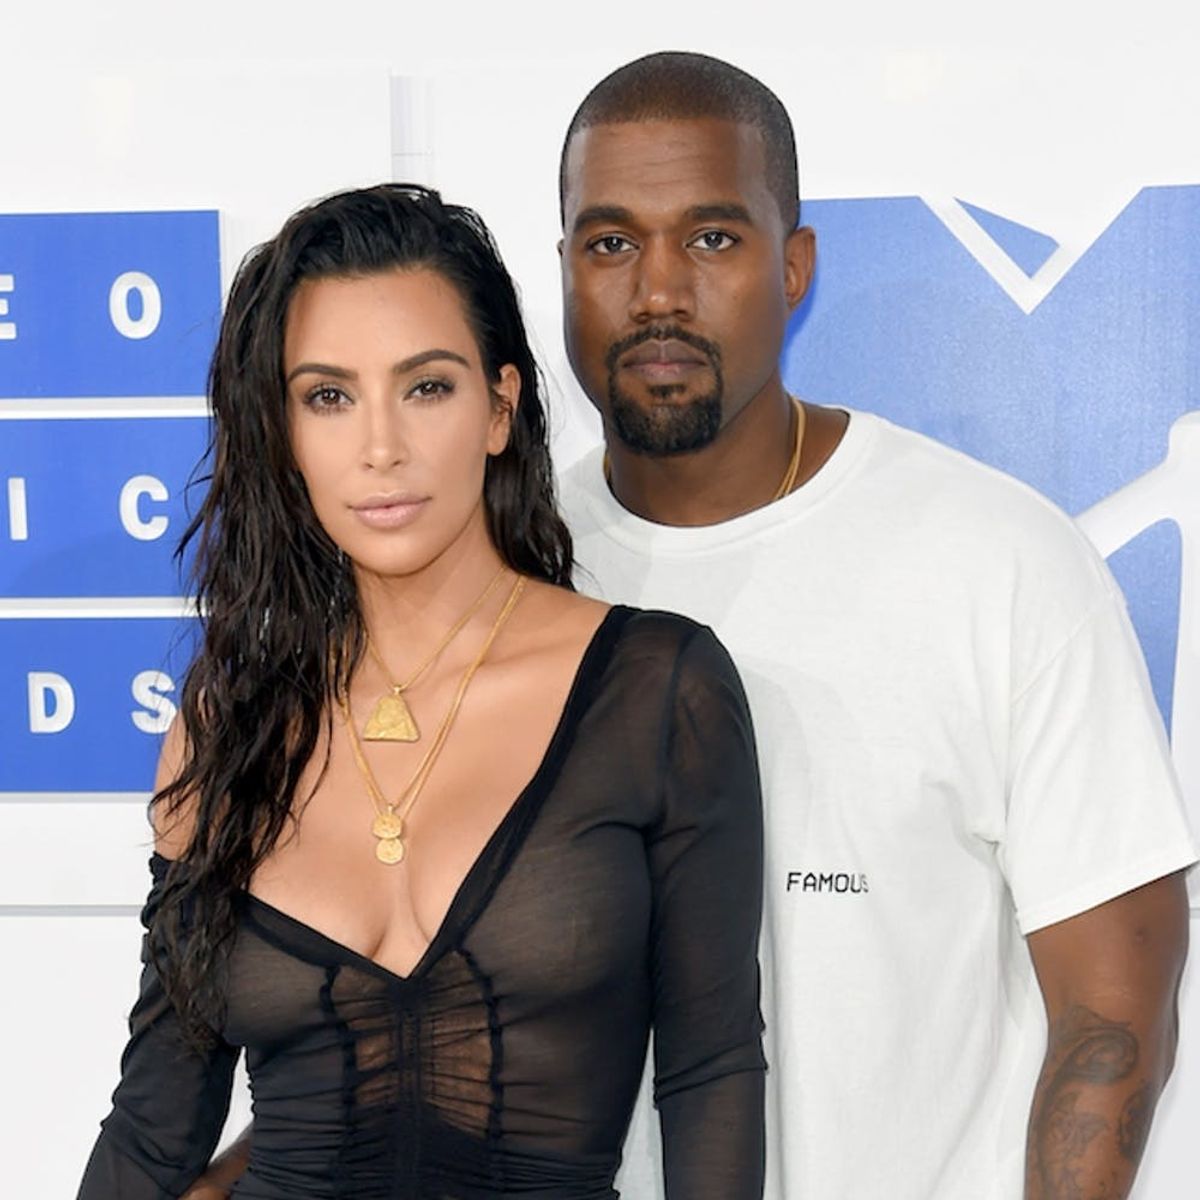 Morning Buzz! Kim Kardashian Reveals She’s Trying for Baby Number 3 + More